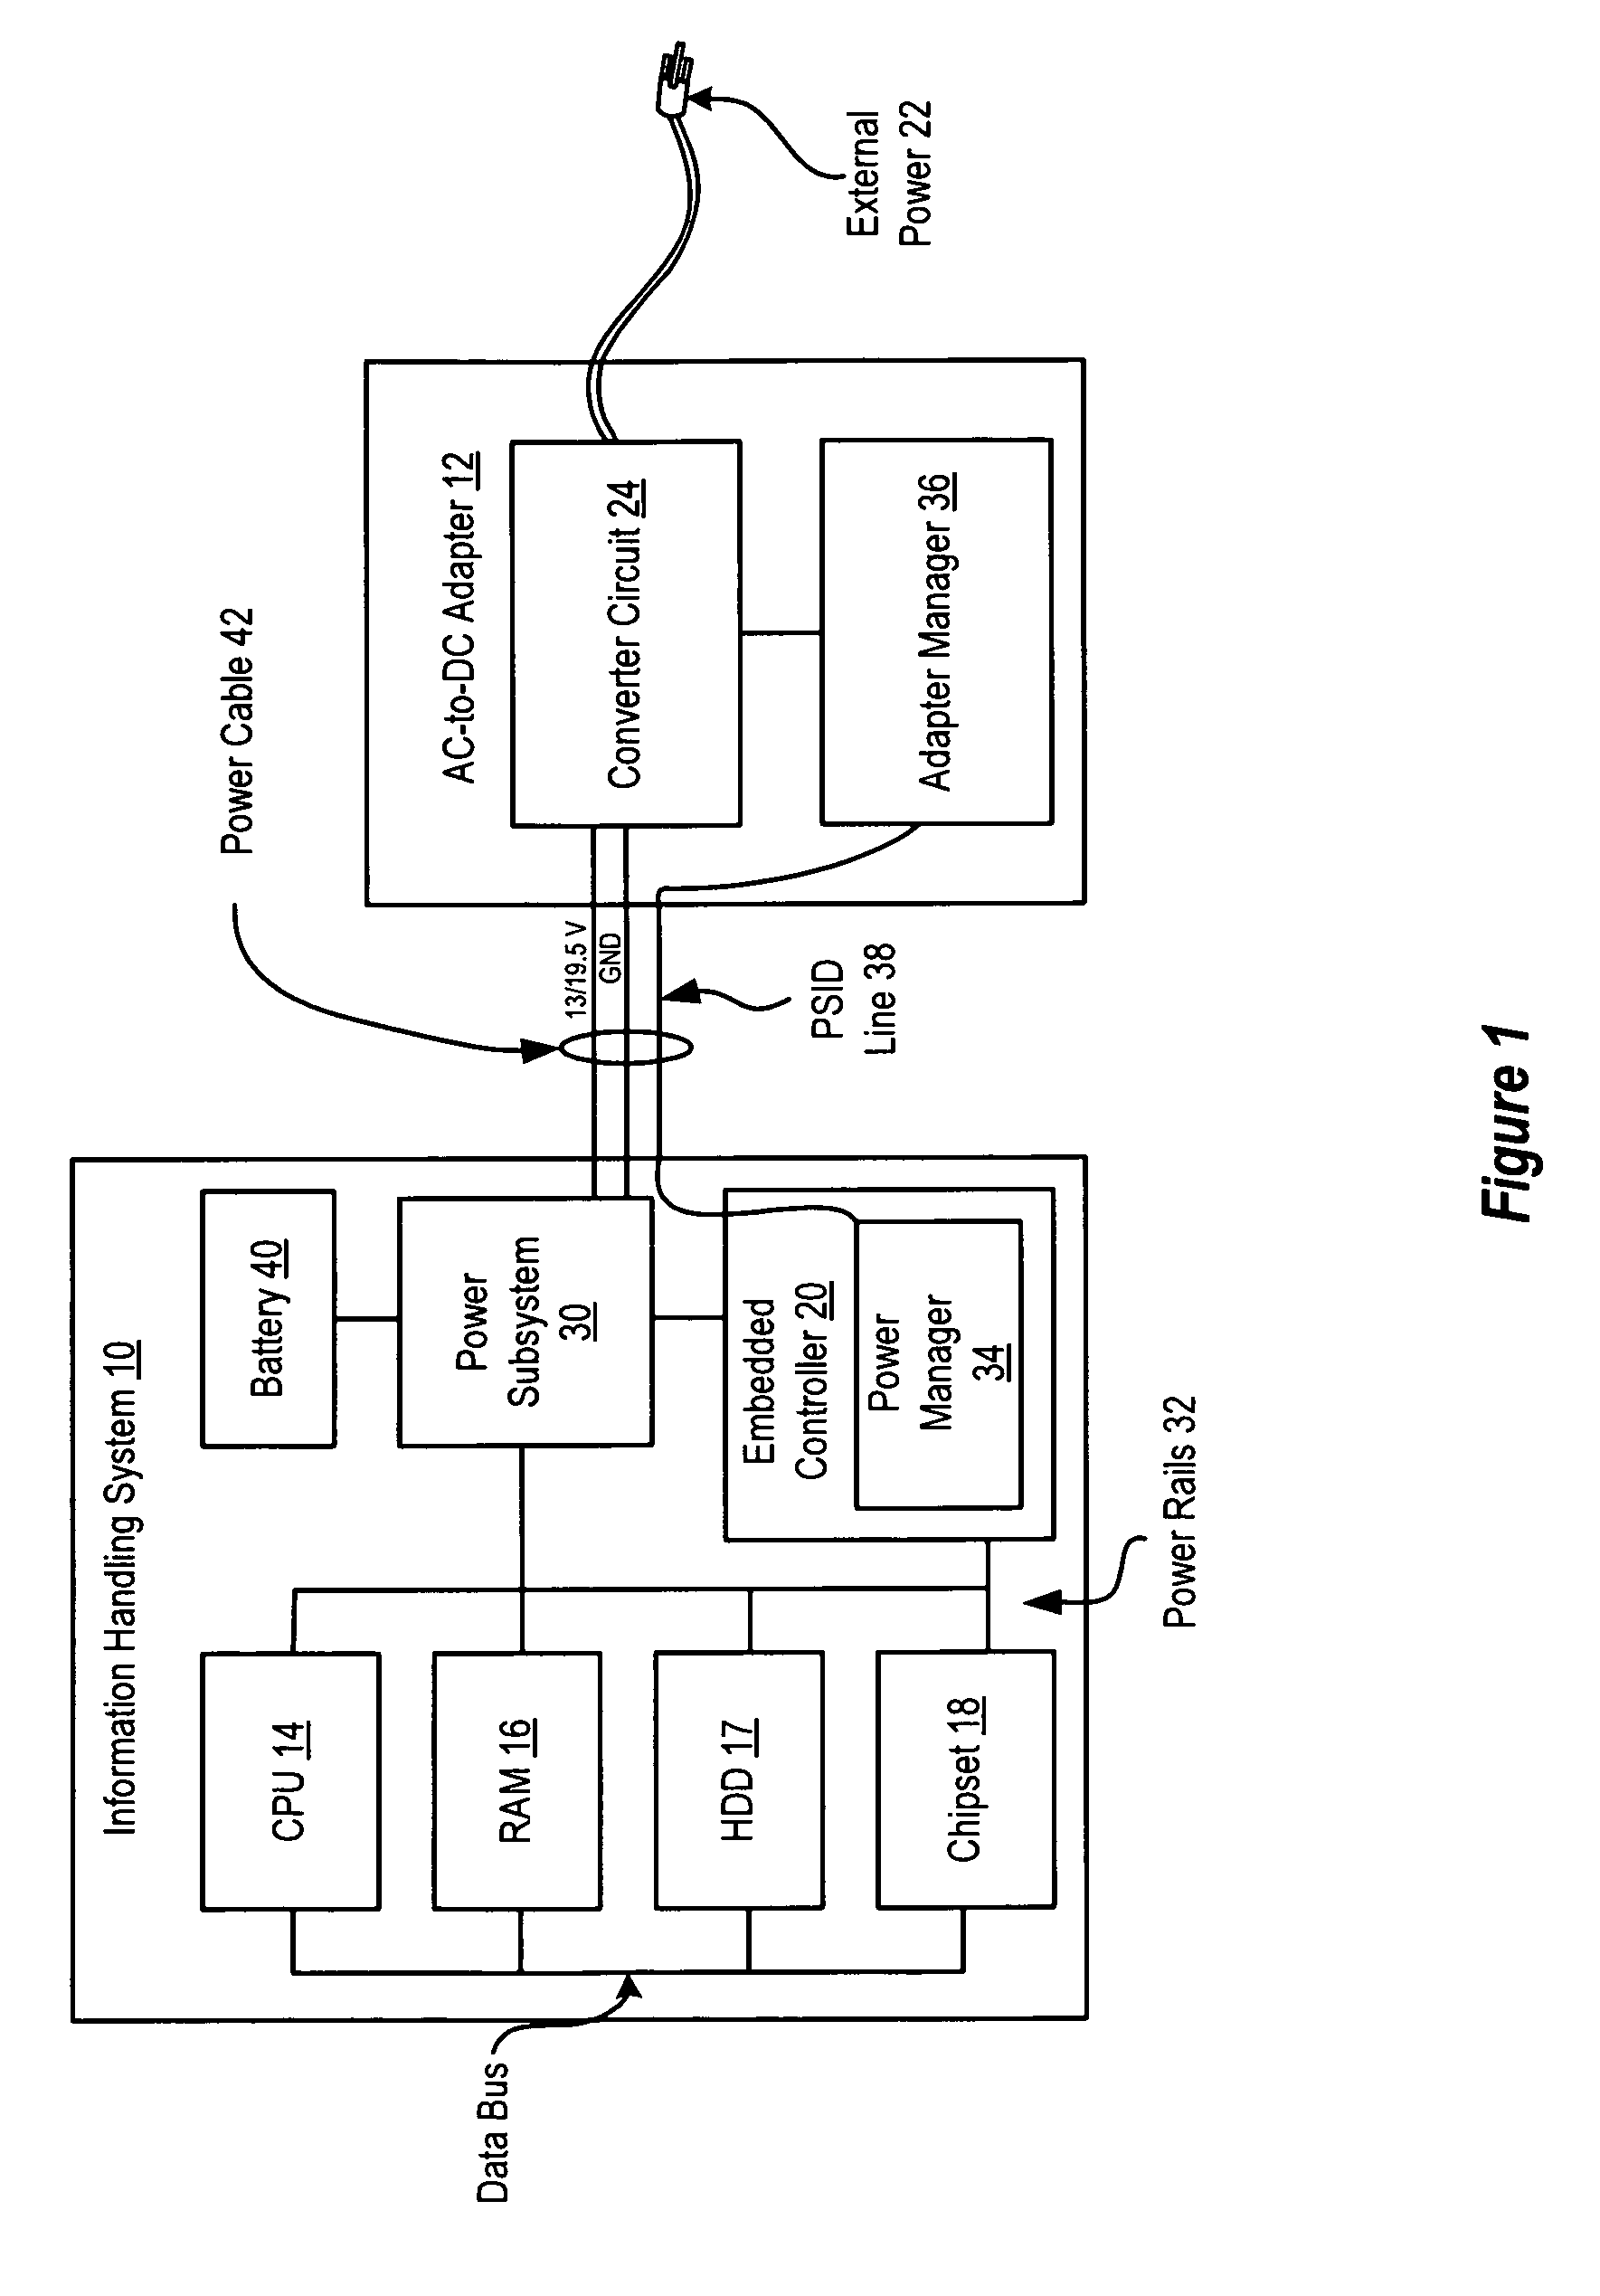 System and method for managing power consumption of an information handling system based on the information handling system power state and battery status